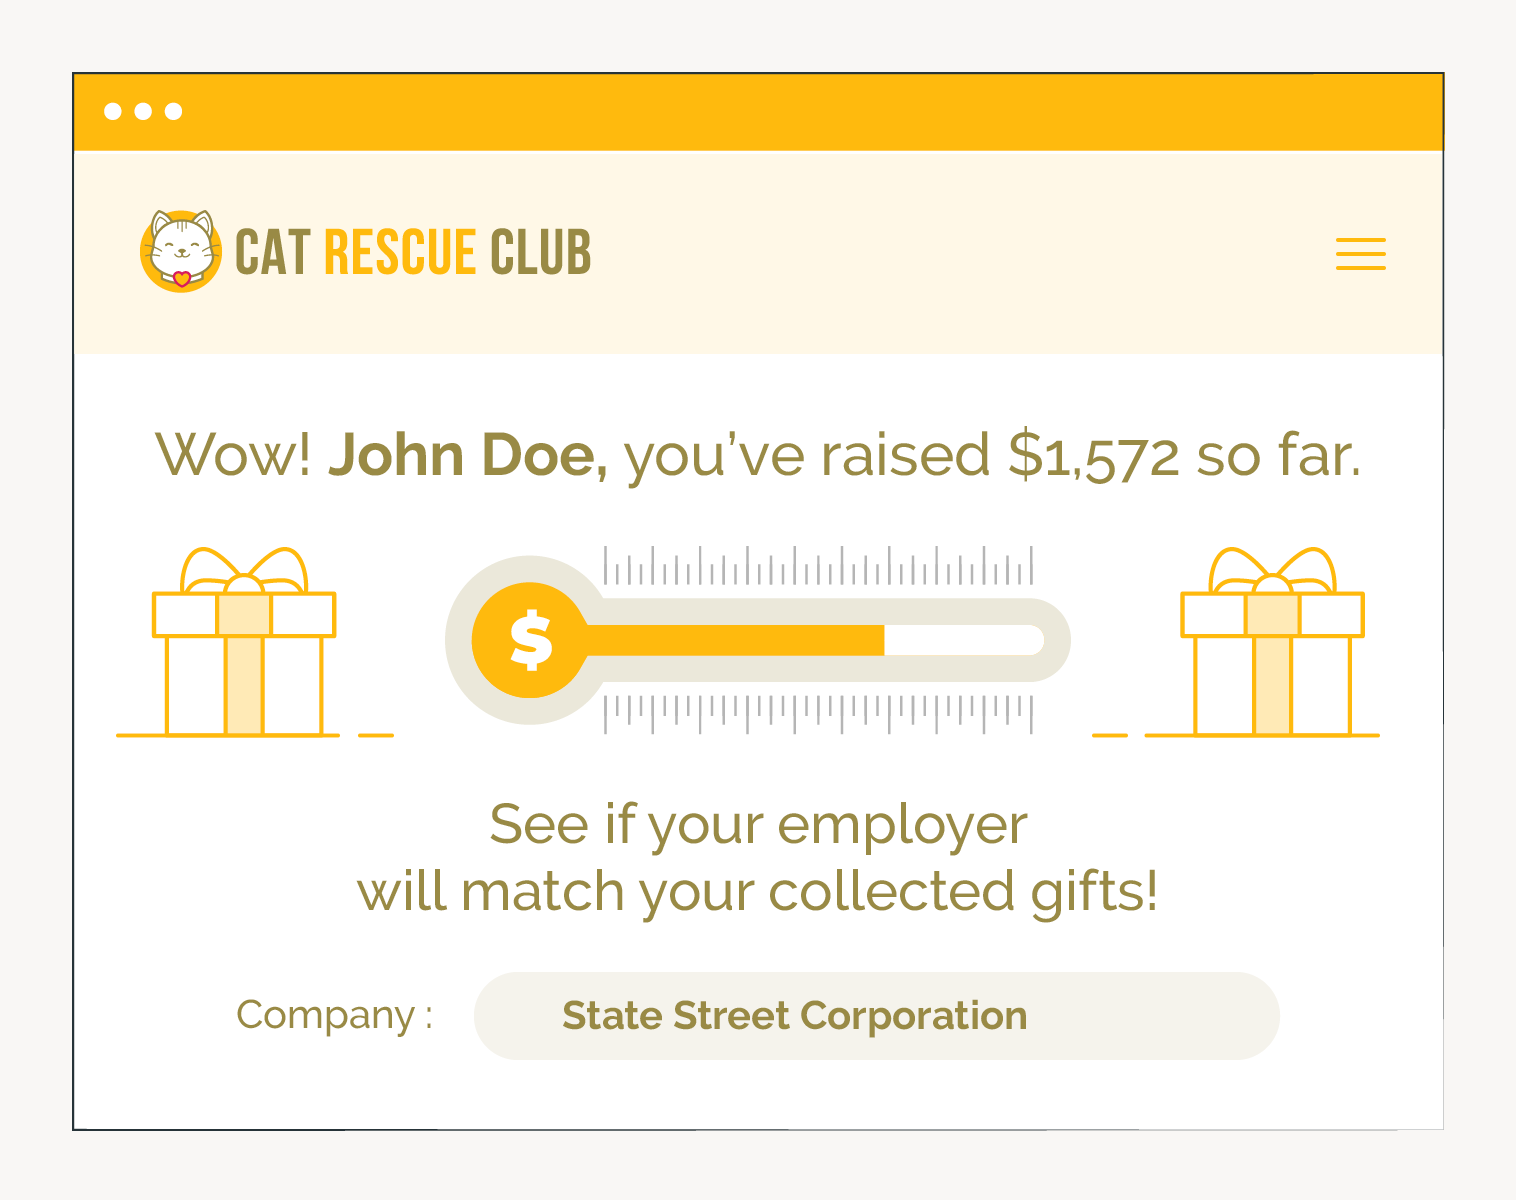 Matching peer-to-peer fundraisers' total collected gifts